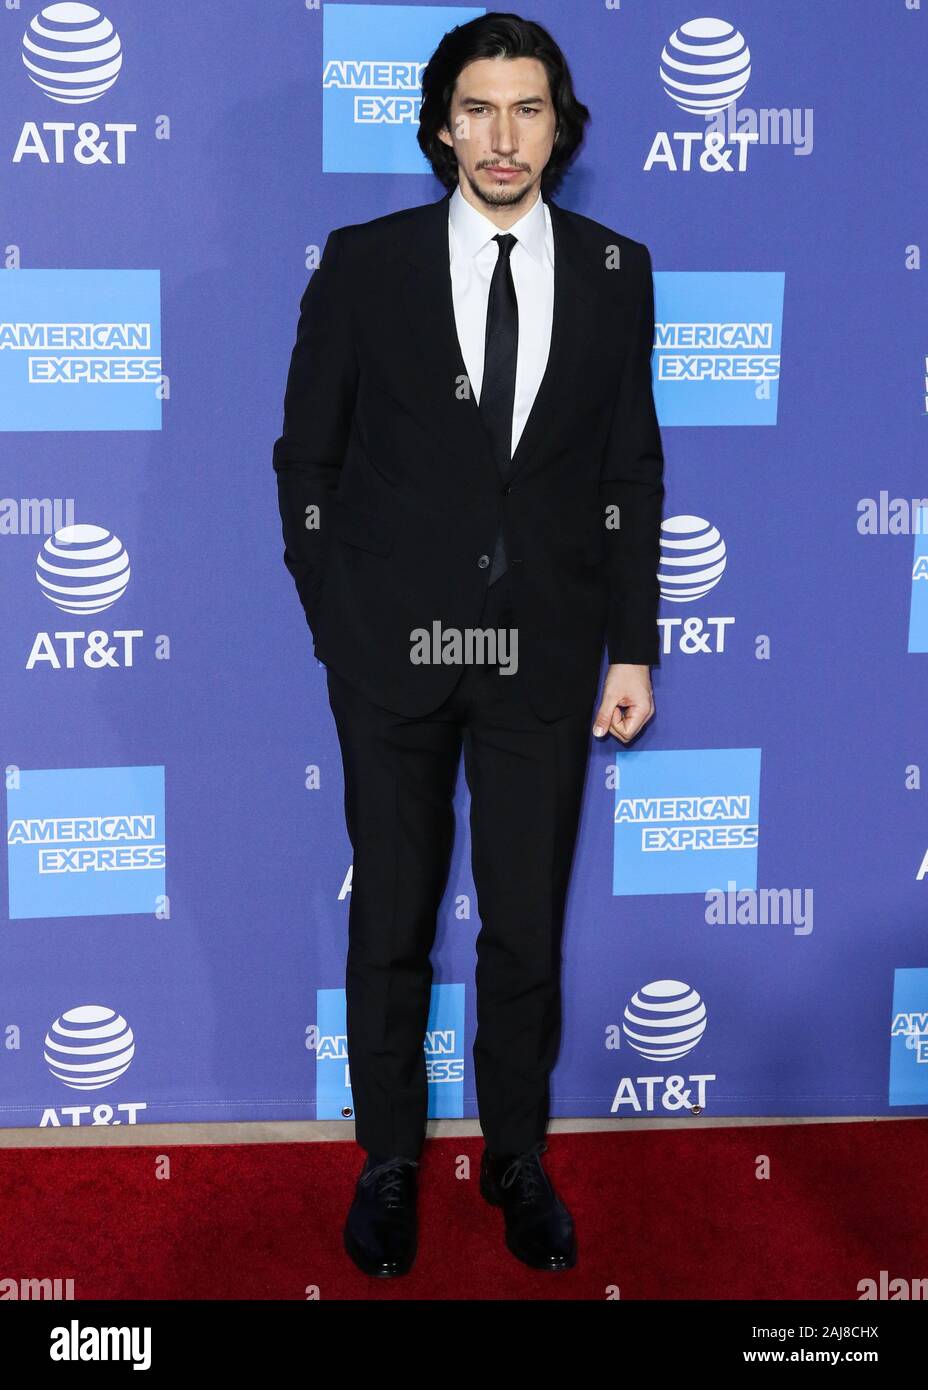 PALM SPRINGS, CALIFORNIA, USA - JANUARY 02: Adam Driver arrives at the 31st Annual Palm Springs International Film Festival Awards Gala held at the Palm Springs Convention Center on January 2, 2020 in Palm Springs, California, United States. (Photo by Xavier Collin/Image Press Agency) Stock Photo